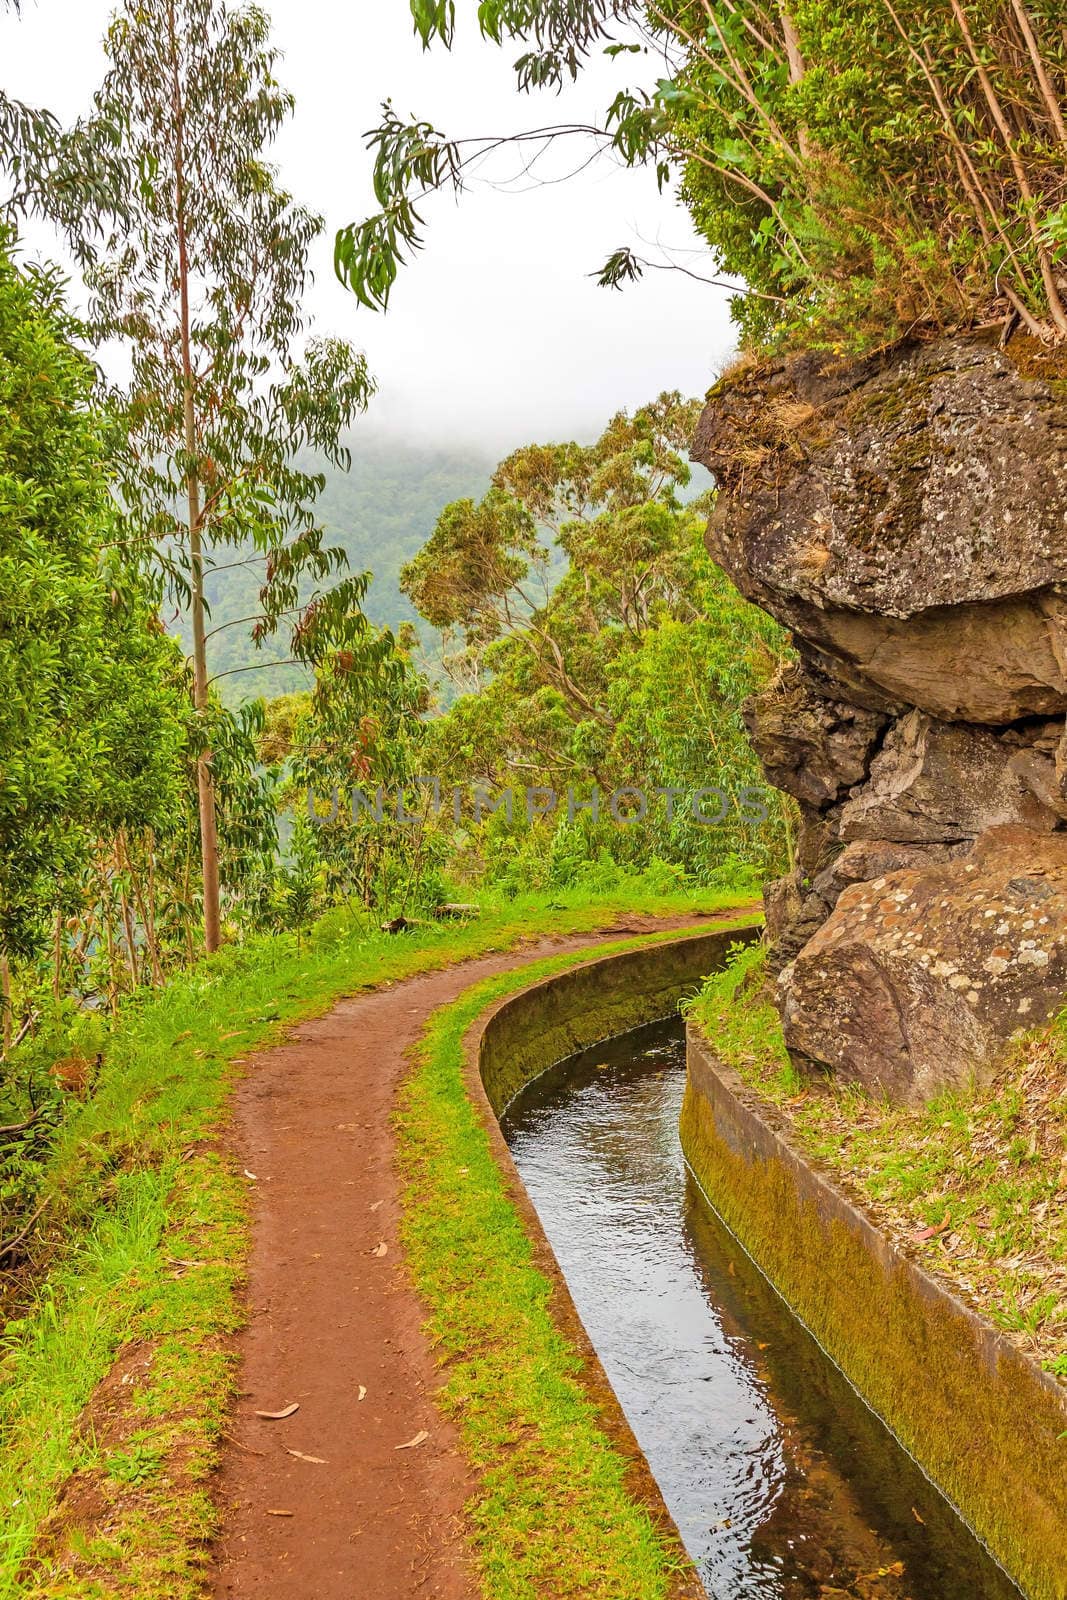 Madeira, hiking along irrigation channel (Levada)